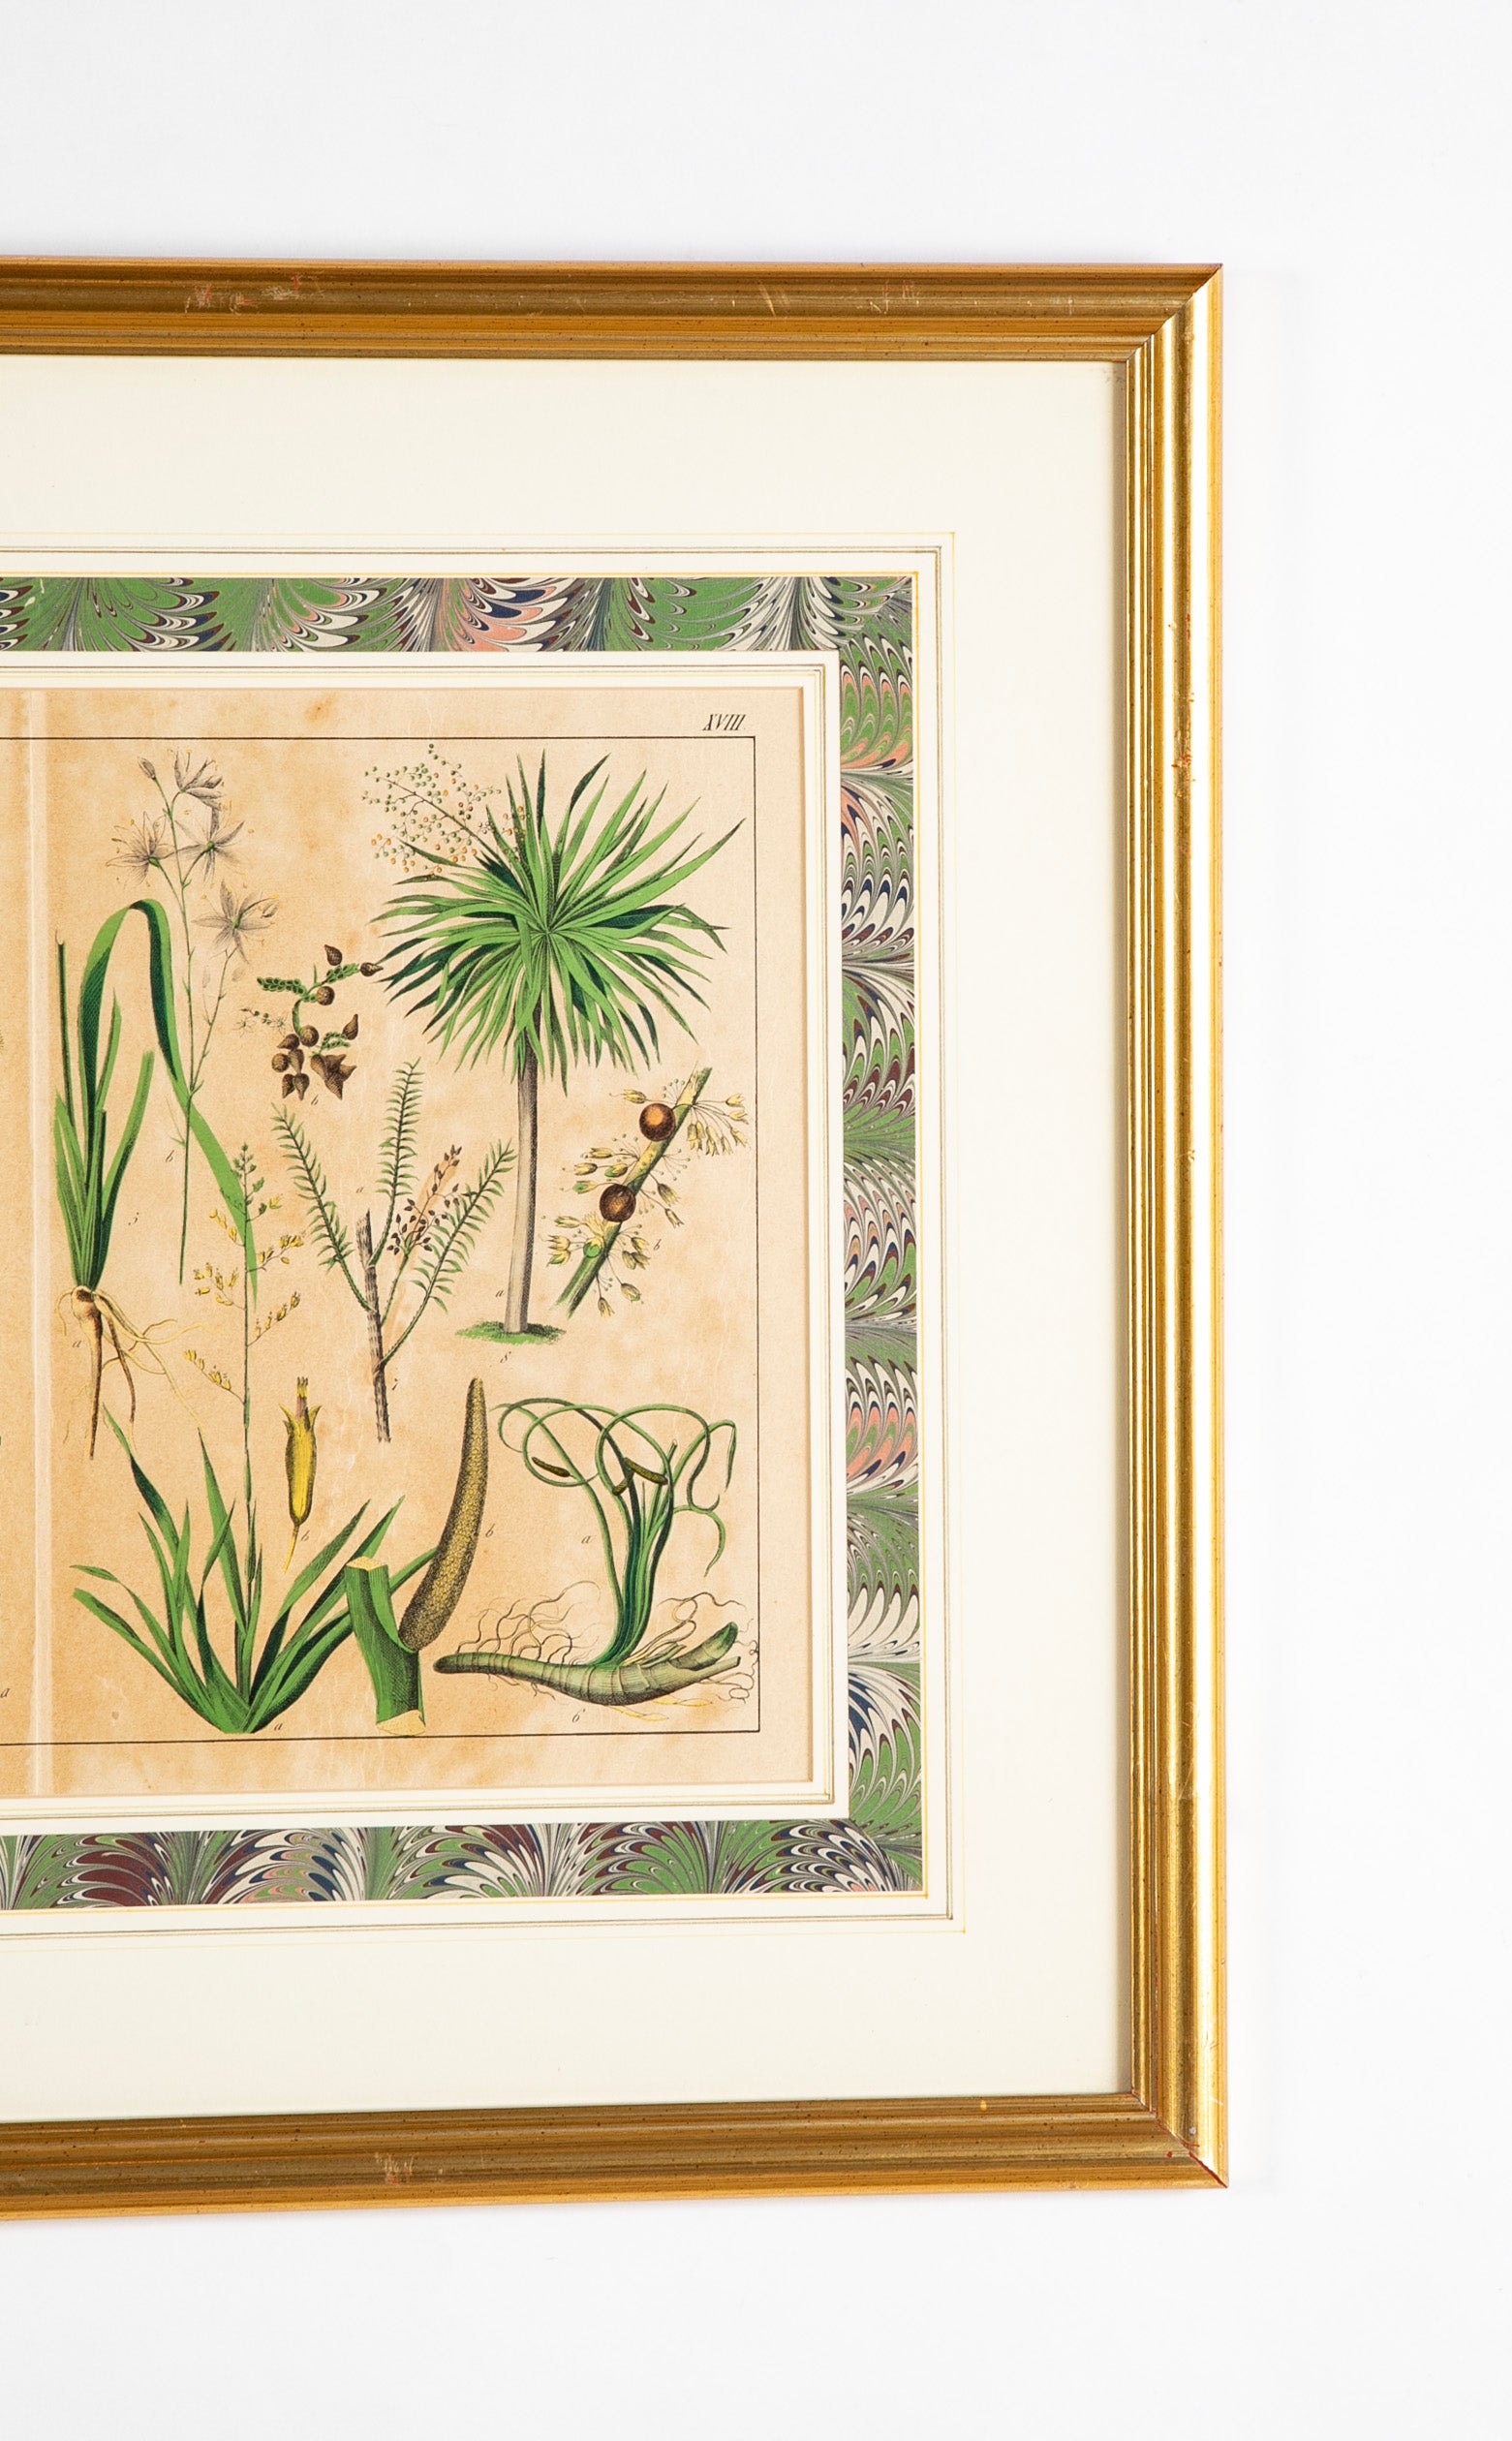 Pair 19th Century German Hand Colored Botanical Prints in Gilt Wood Frames